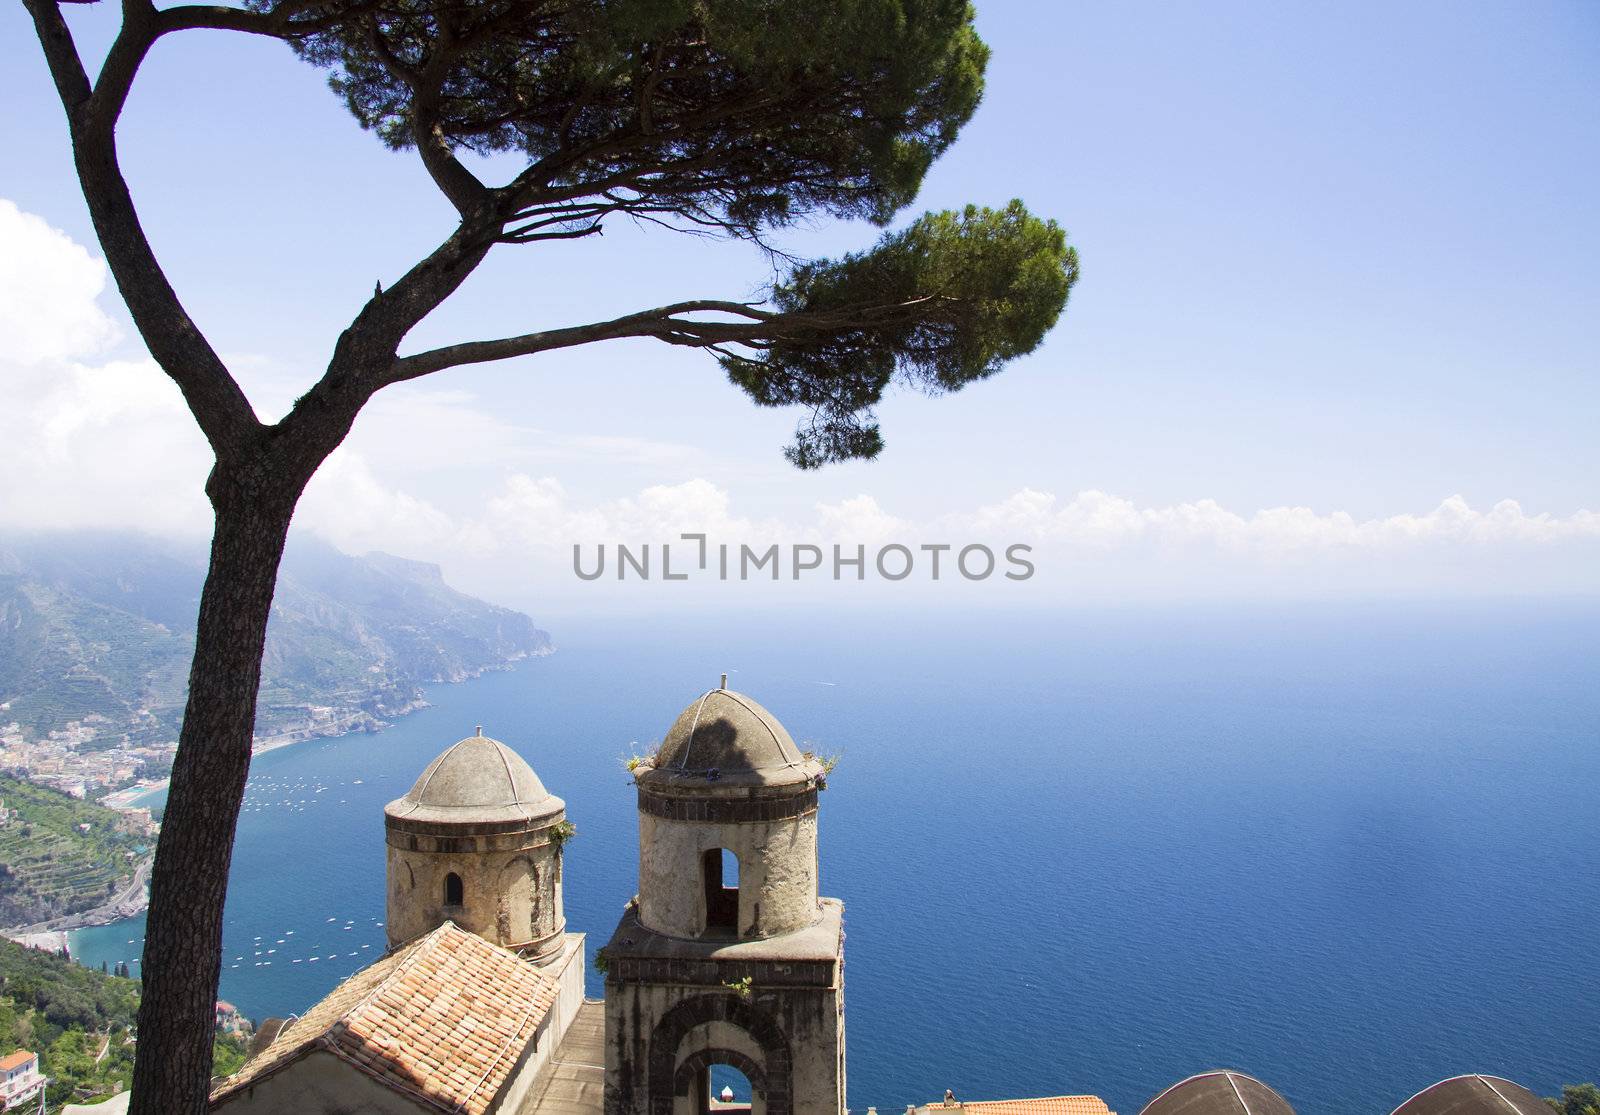 The Ravello garden offers a view of the two church towers, a tree and the Amalfi coast 